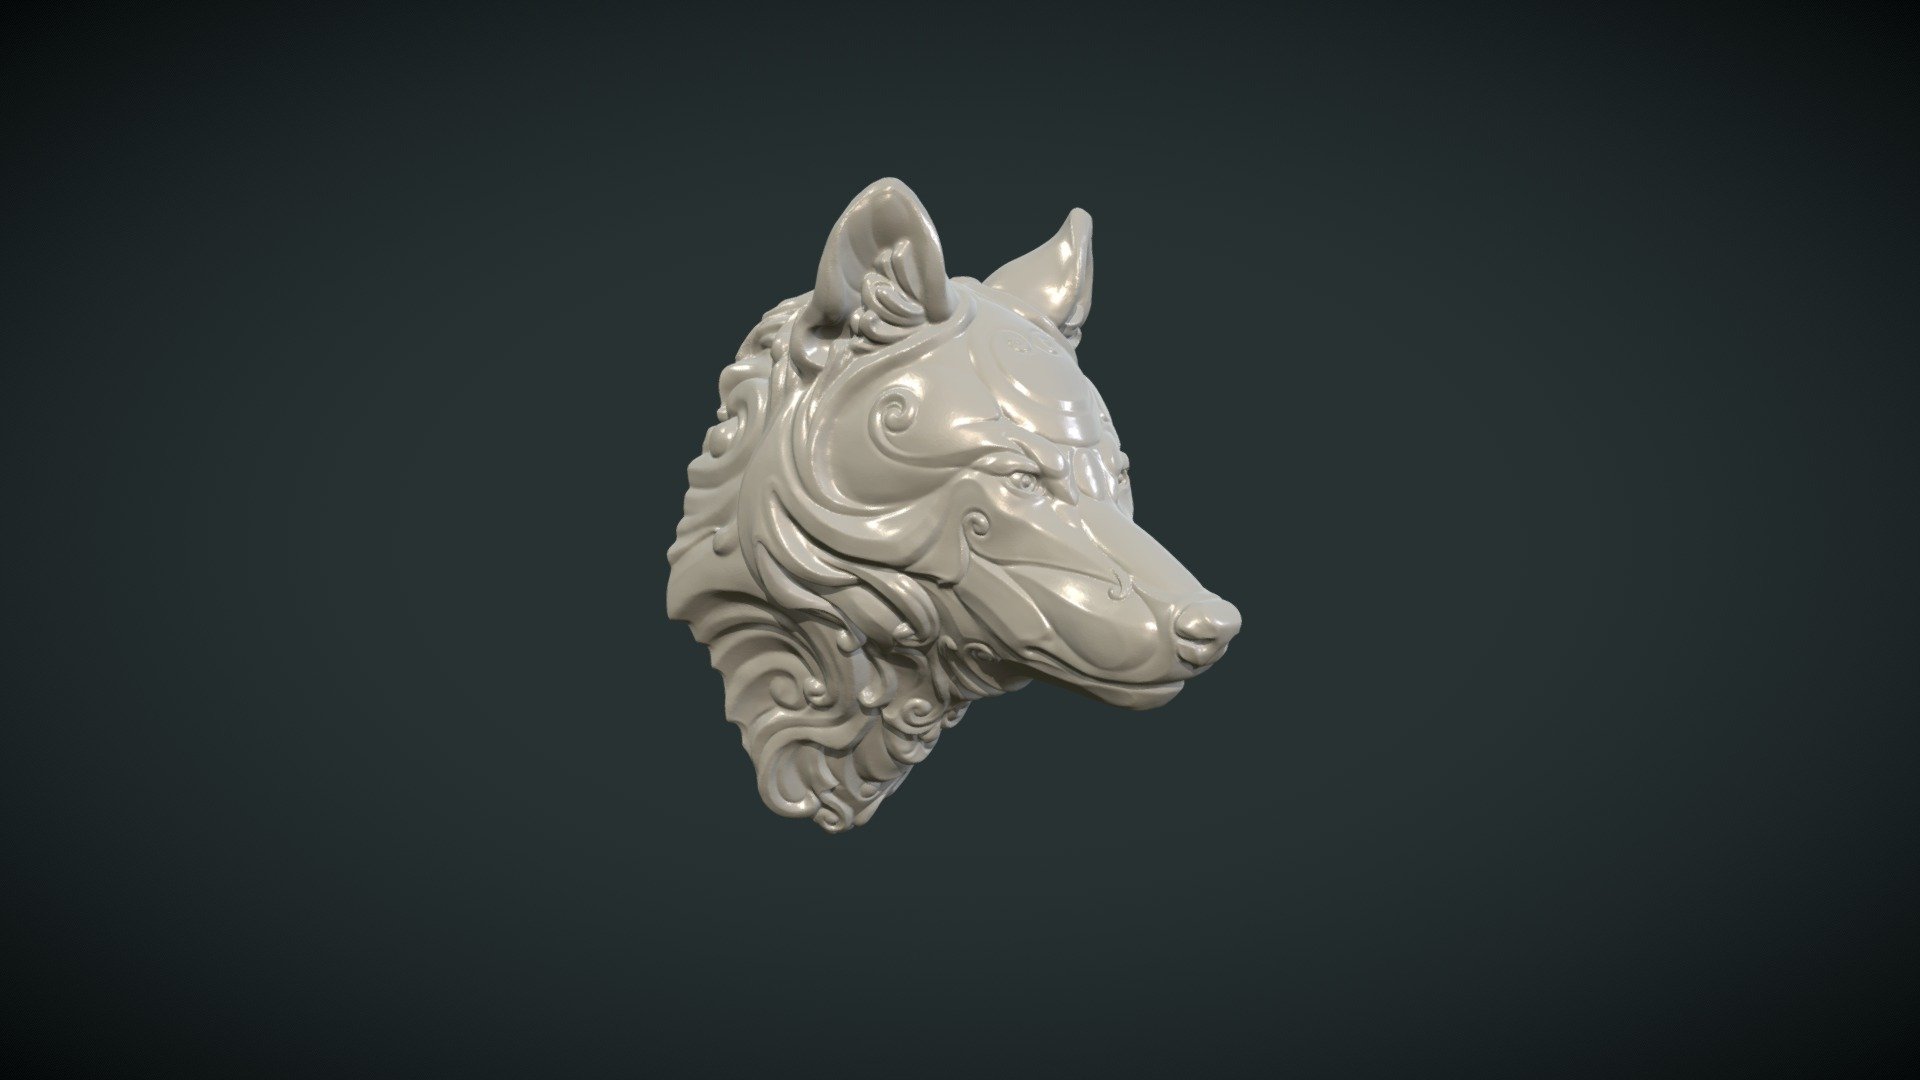 Print ready Wolf head

Measure units are millimeters, it is about 4.75 cm in height.

Mesh is manifold, no holes, no inverted faces, no bad contiguous edges.

Two versions of the model is available:

1) WWHead_solid (.blend, .stl, .obj, .fbx) 511080 triangular faces.

2) WWHead_Hollow (.blend, .stl, .obj, .fbx) 509062 triangular faces.

Wall thickness for the hollow version is about 2 mm 3d model